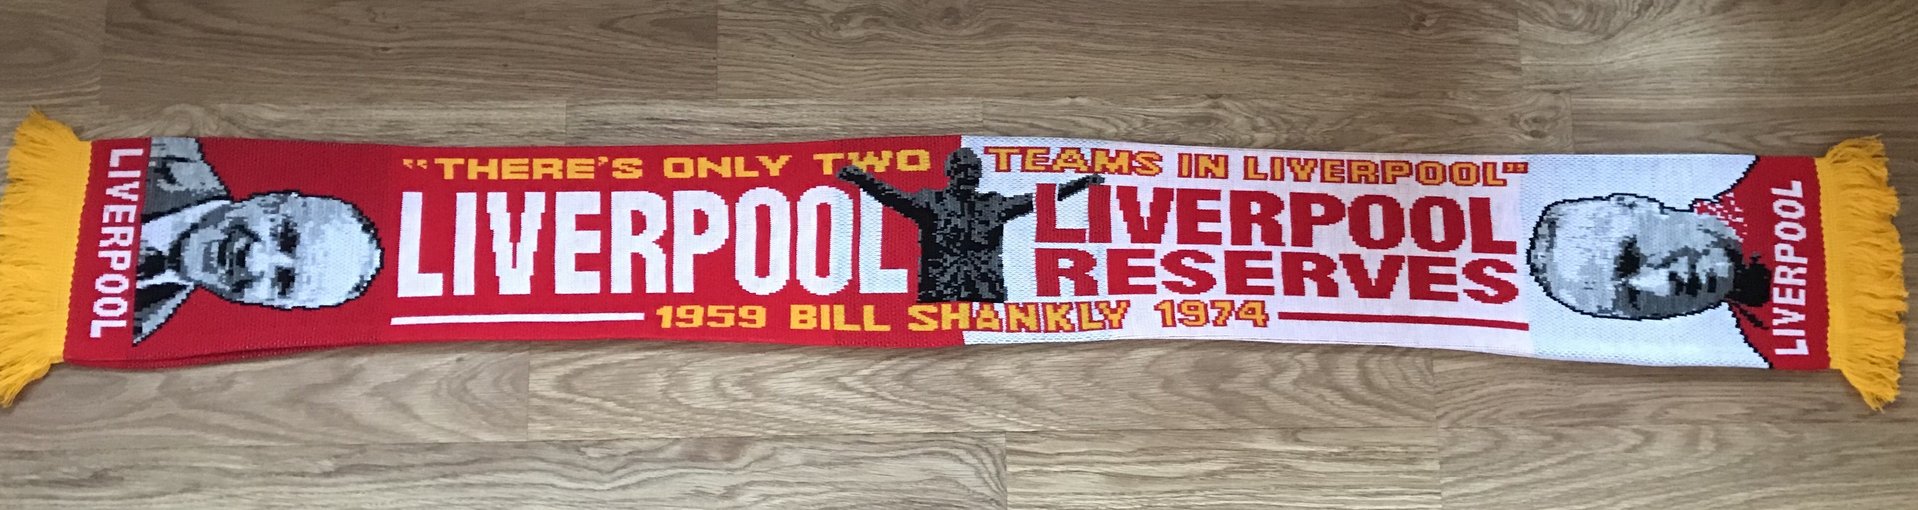 Only teams on merseyside scarf